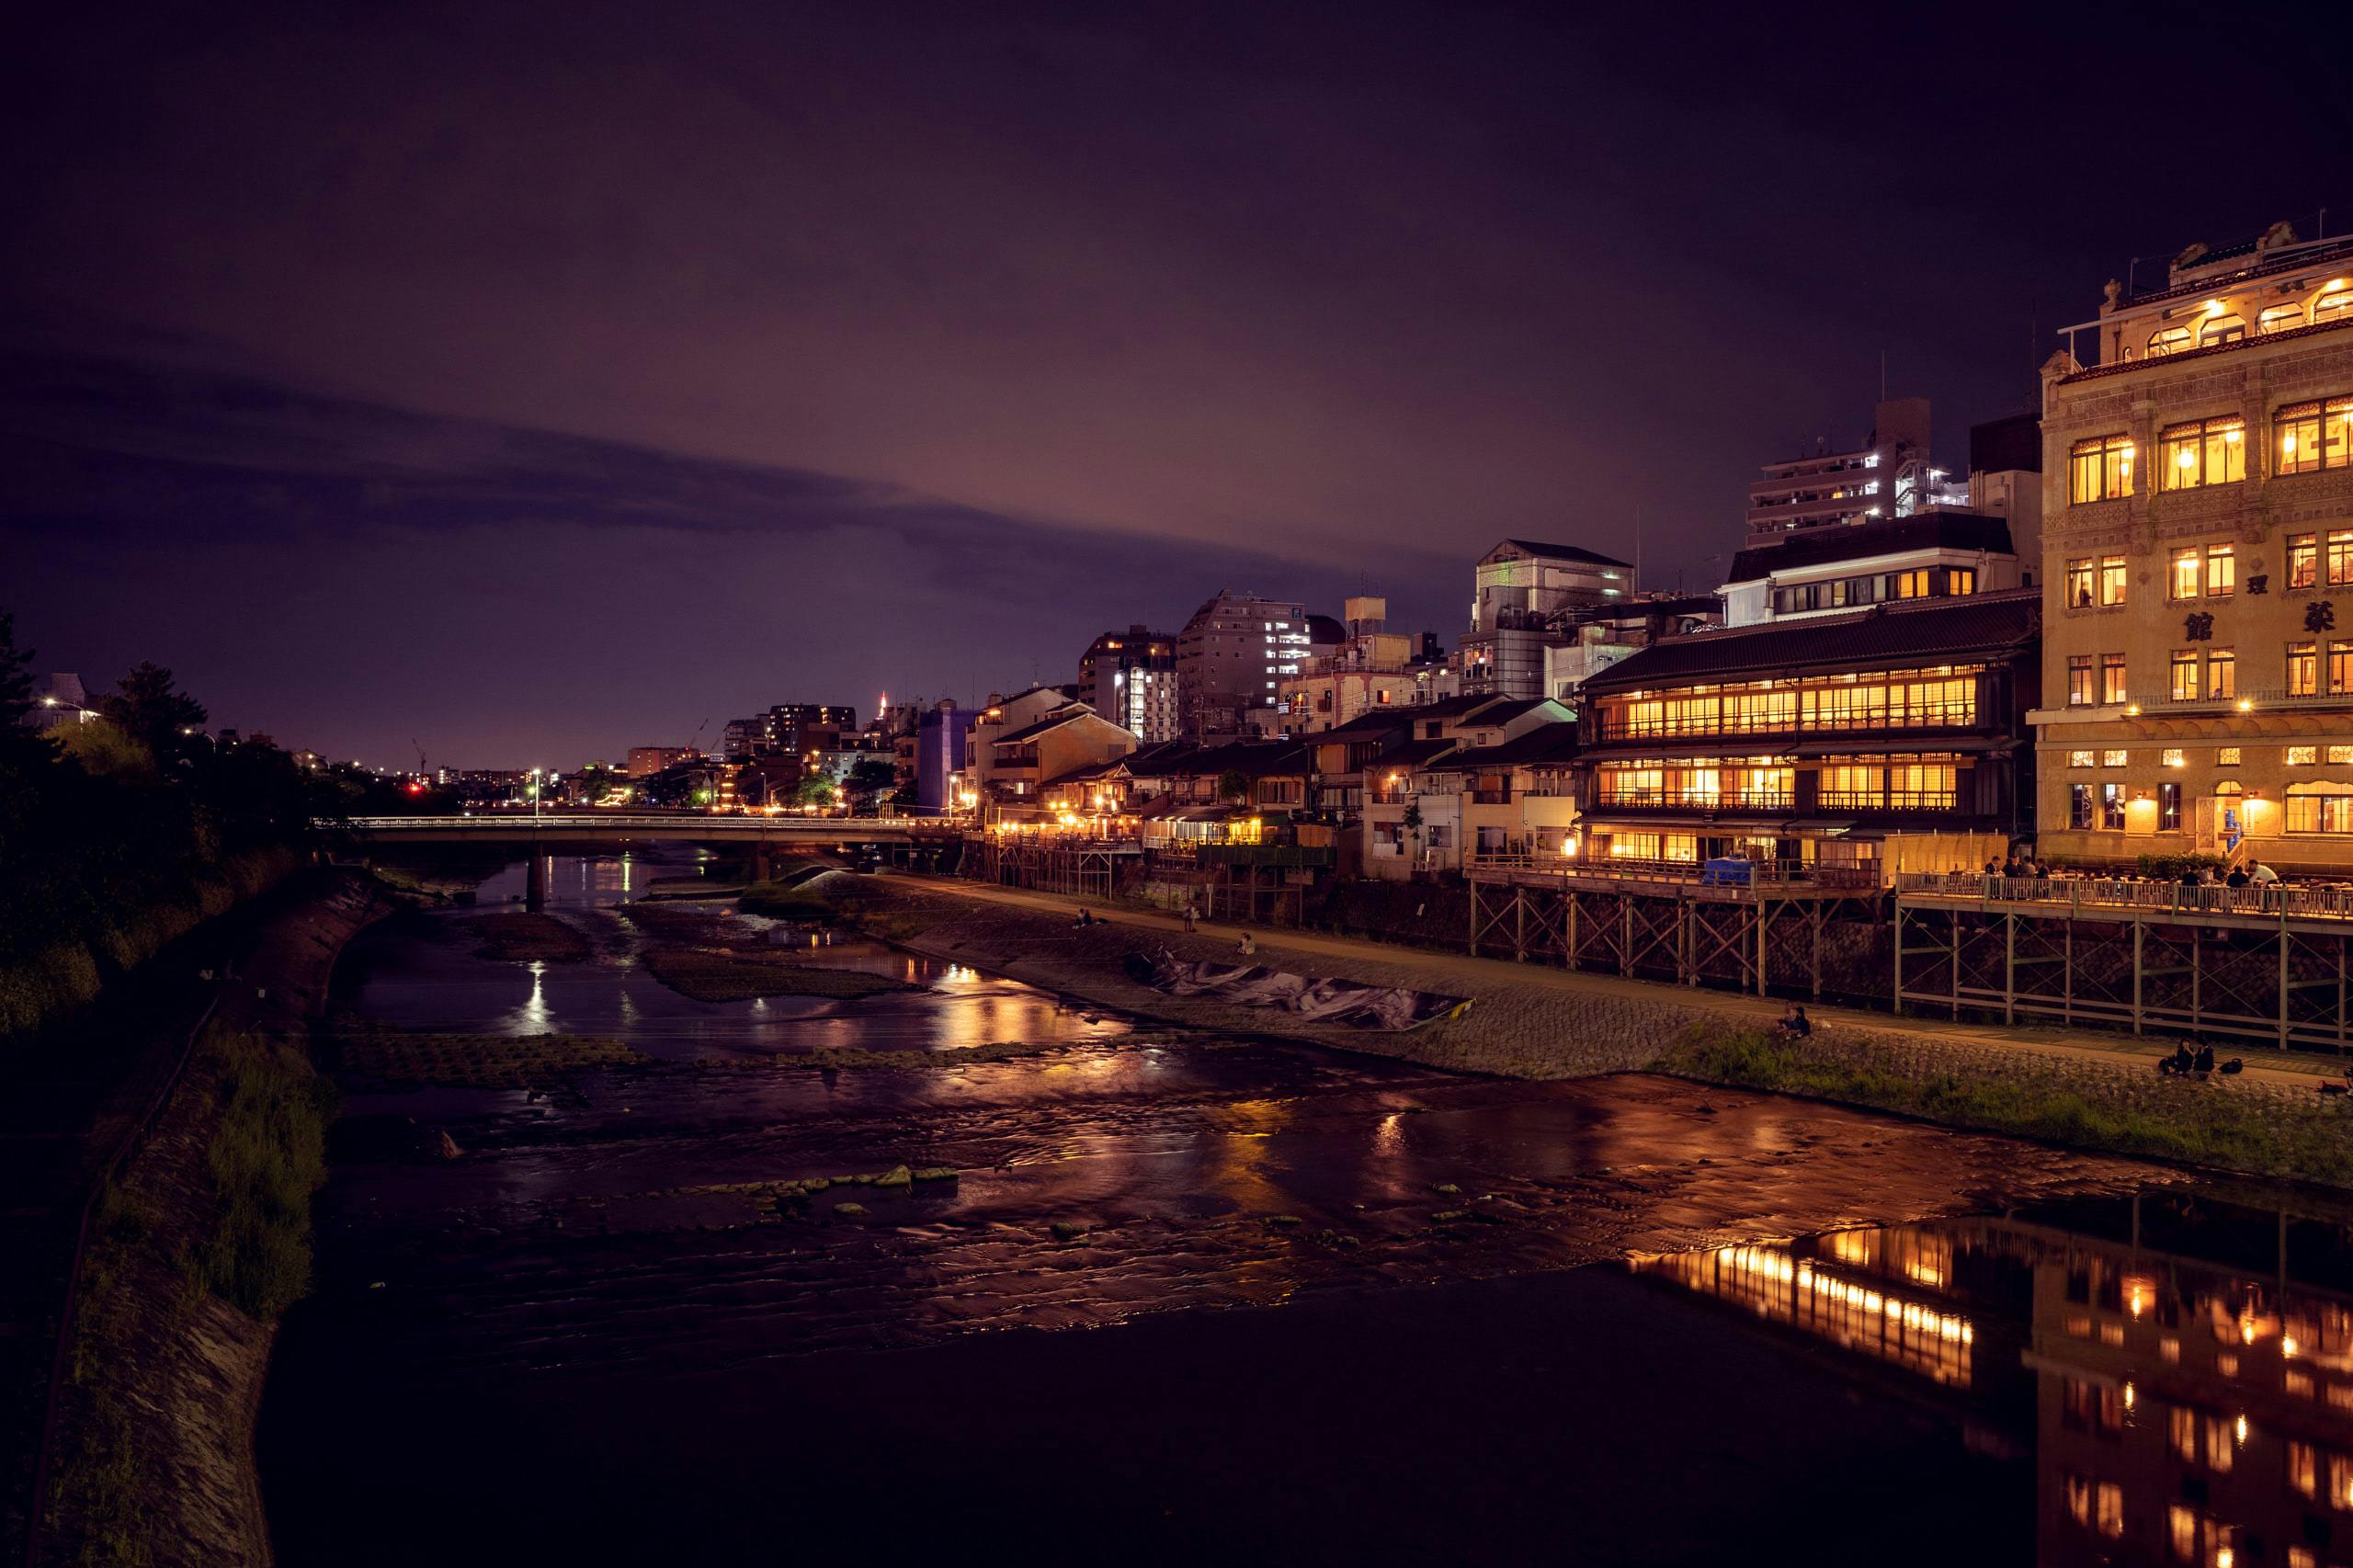 A riverfront in Kyoto at night